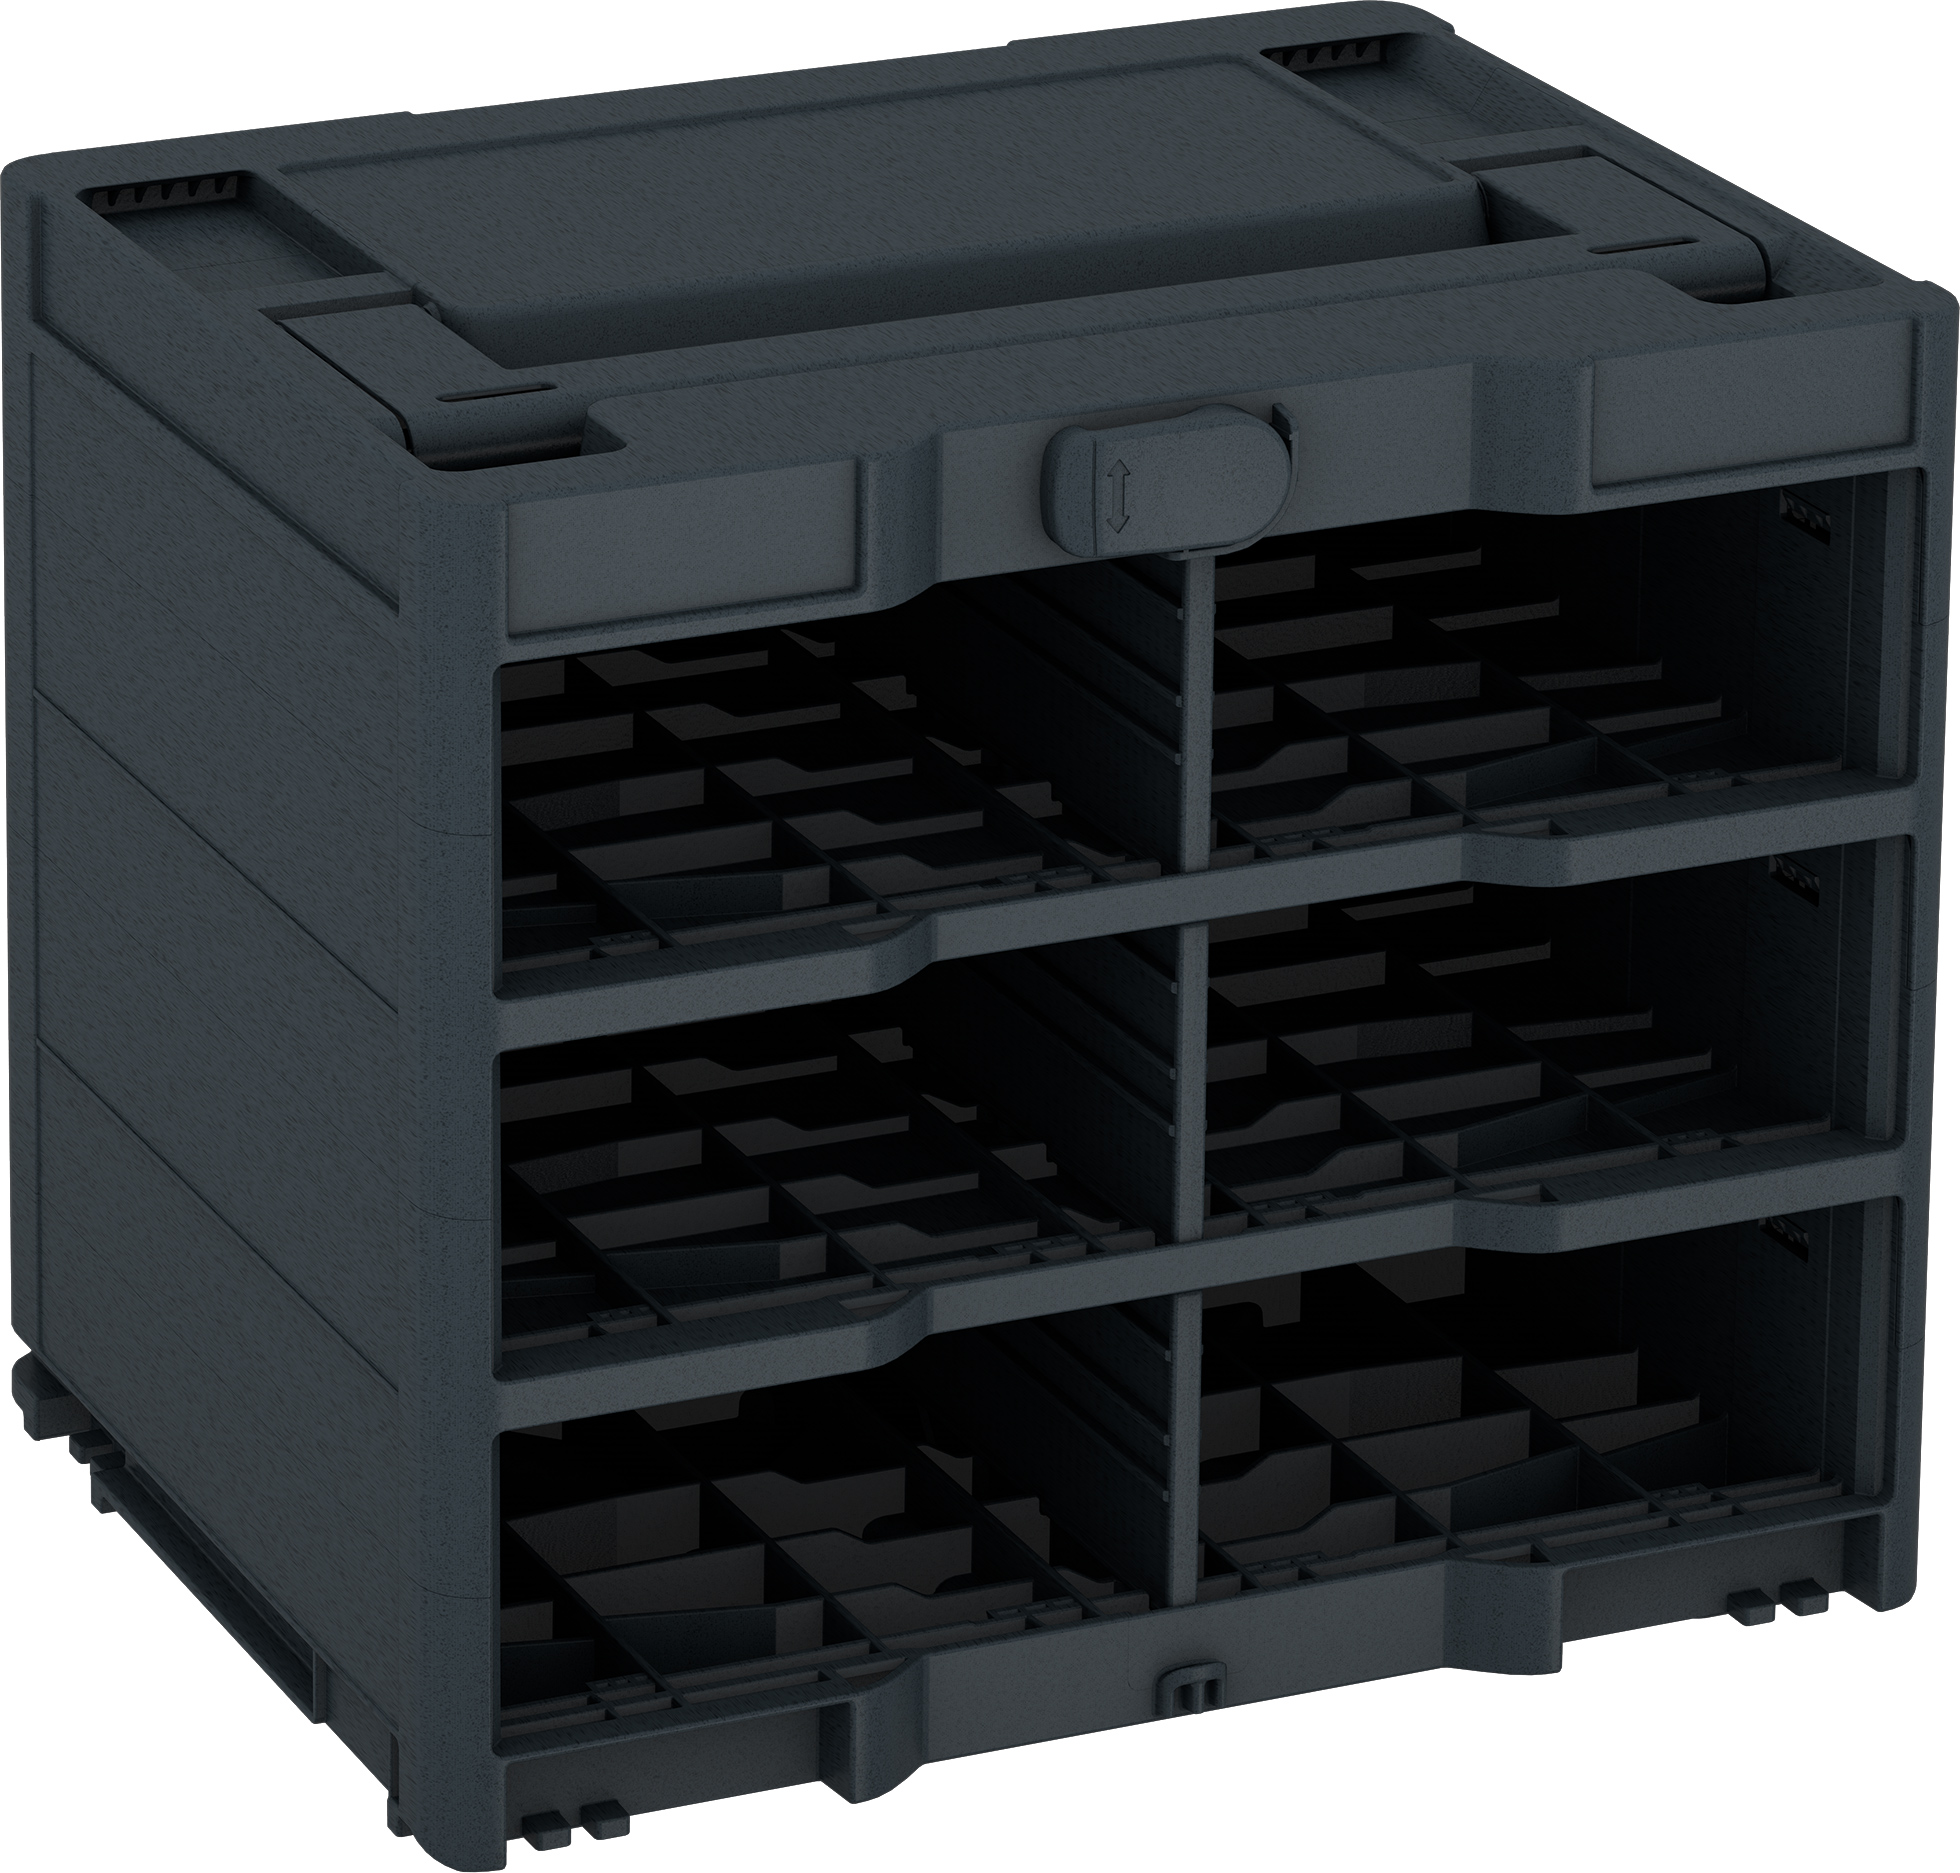 Systainer³ Rack/0 M 337 - Korpus Farbe: Anthrazit (RAL 7016) - Griff Farbe:  Anthrazit (RAL 7016) - Verschluss Farbe: Anthrazit (RAL 7016)